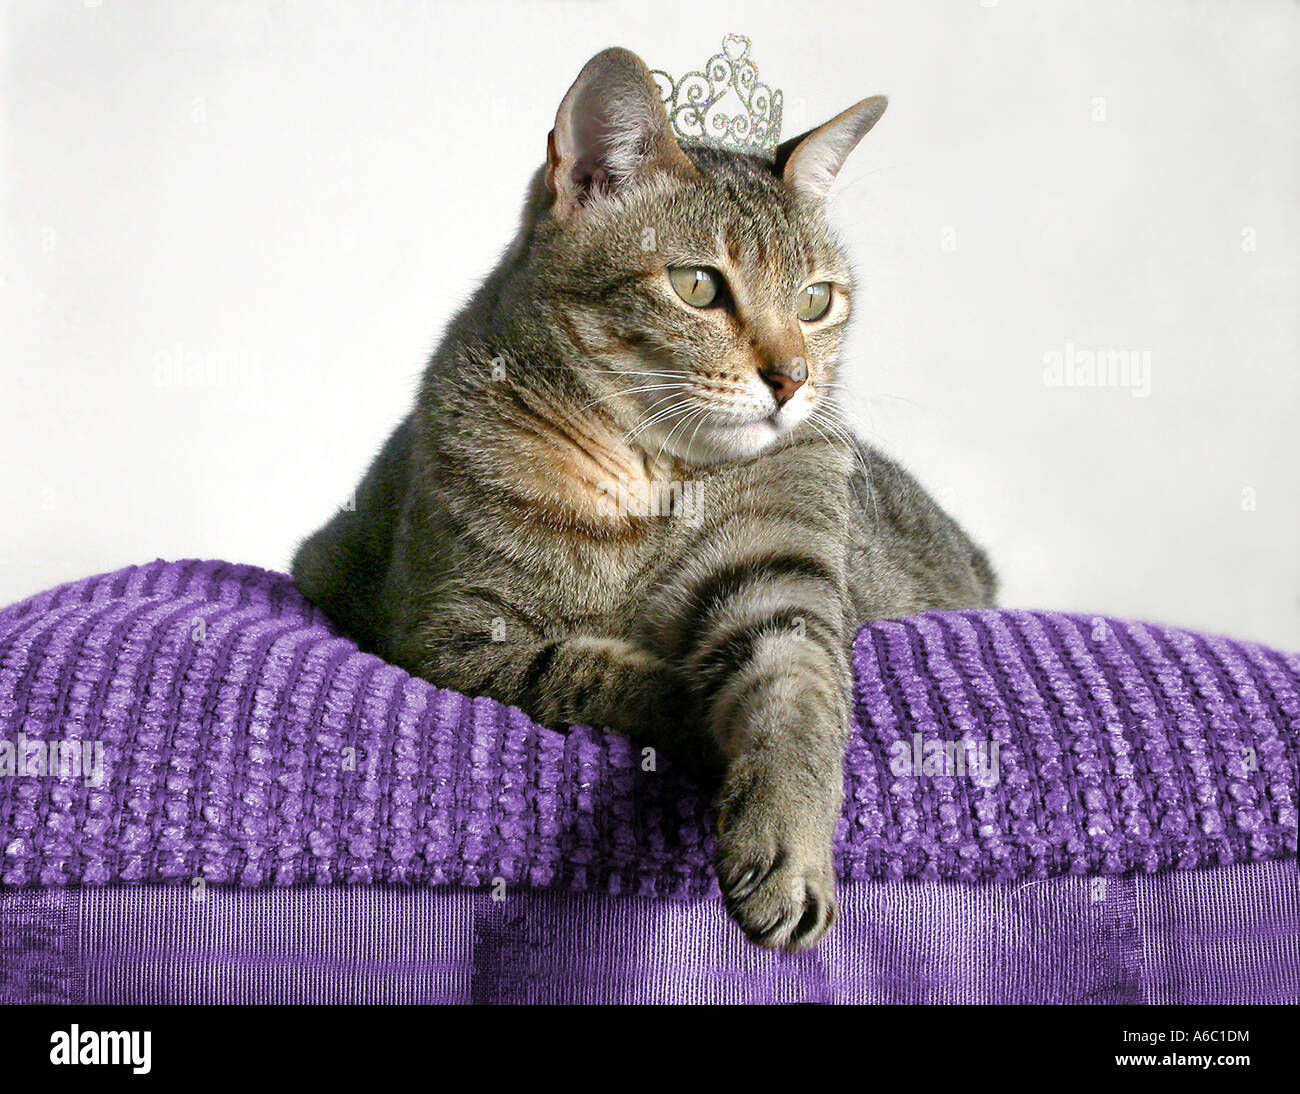 Humorous image of a striped cat sitting atop a royal purple cushion wearing a jeweled tiara or crown. Stock Photo